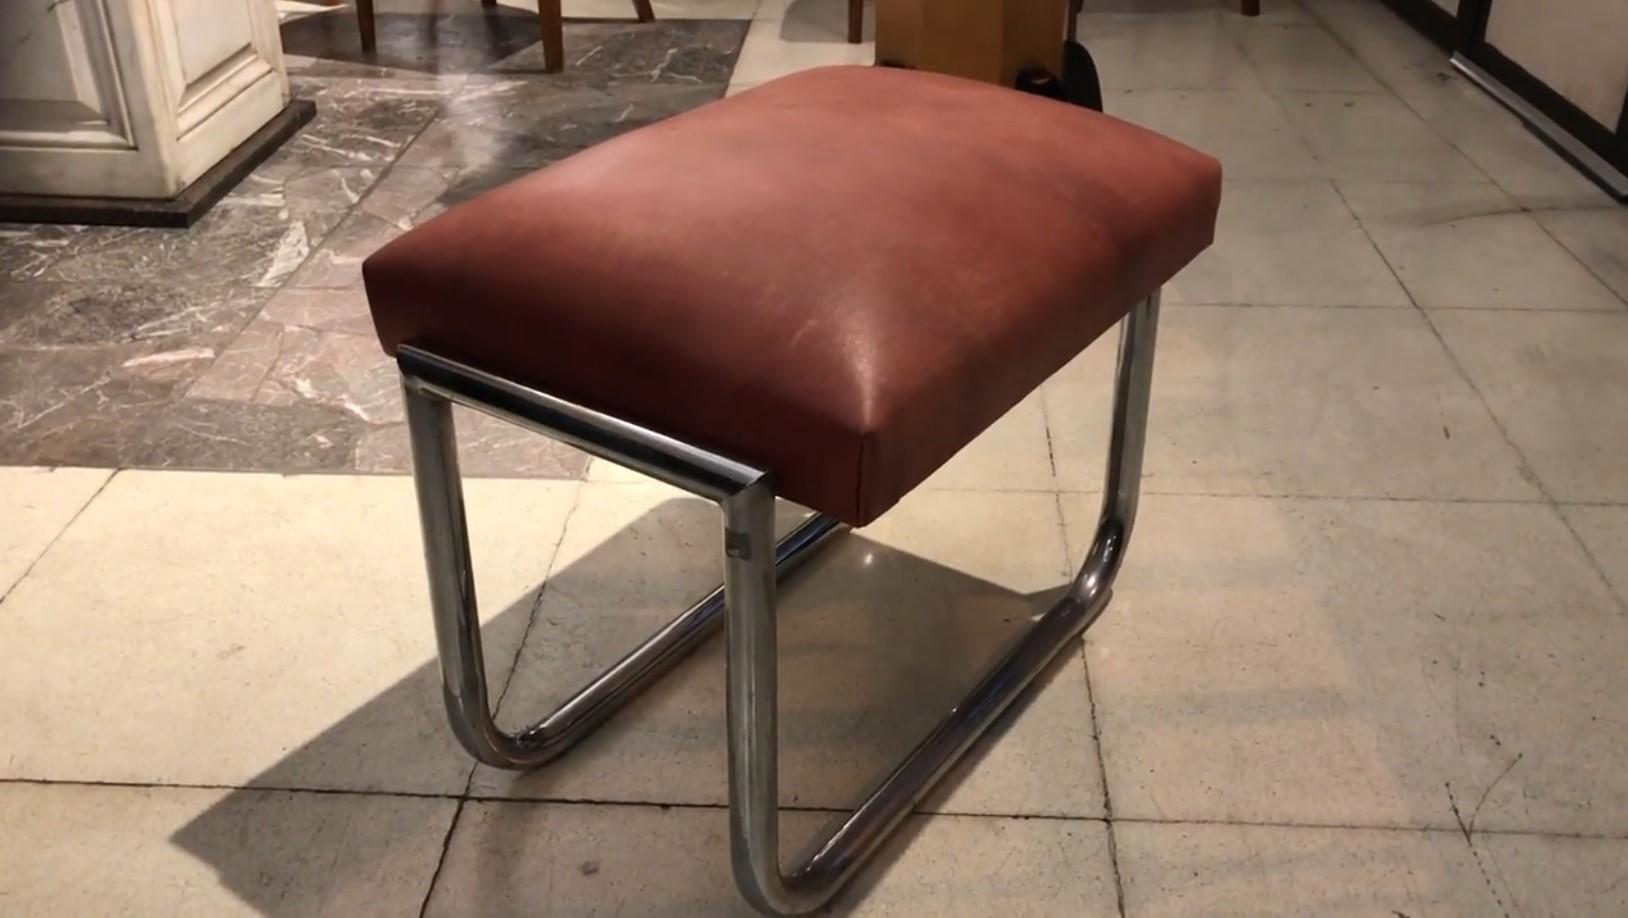 Bauhaus Stool, Material, Chrome and Leather, Country German, 1940 For Sale 2